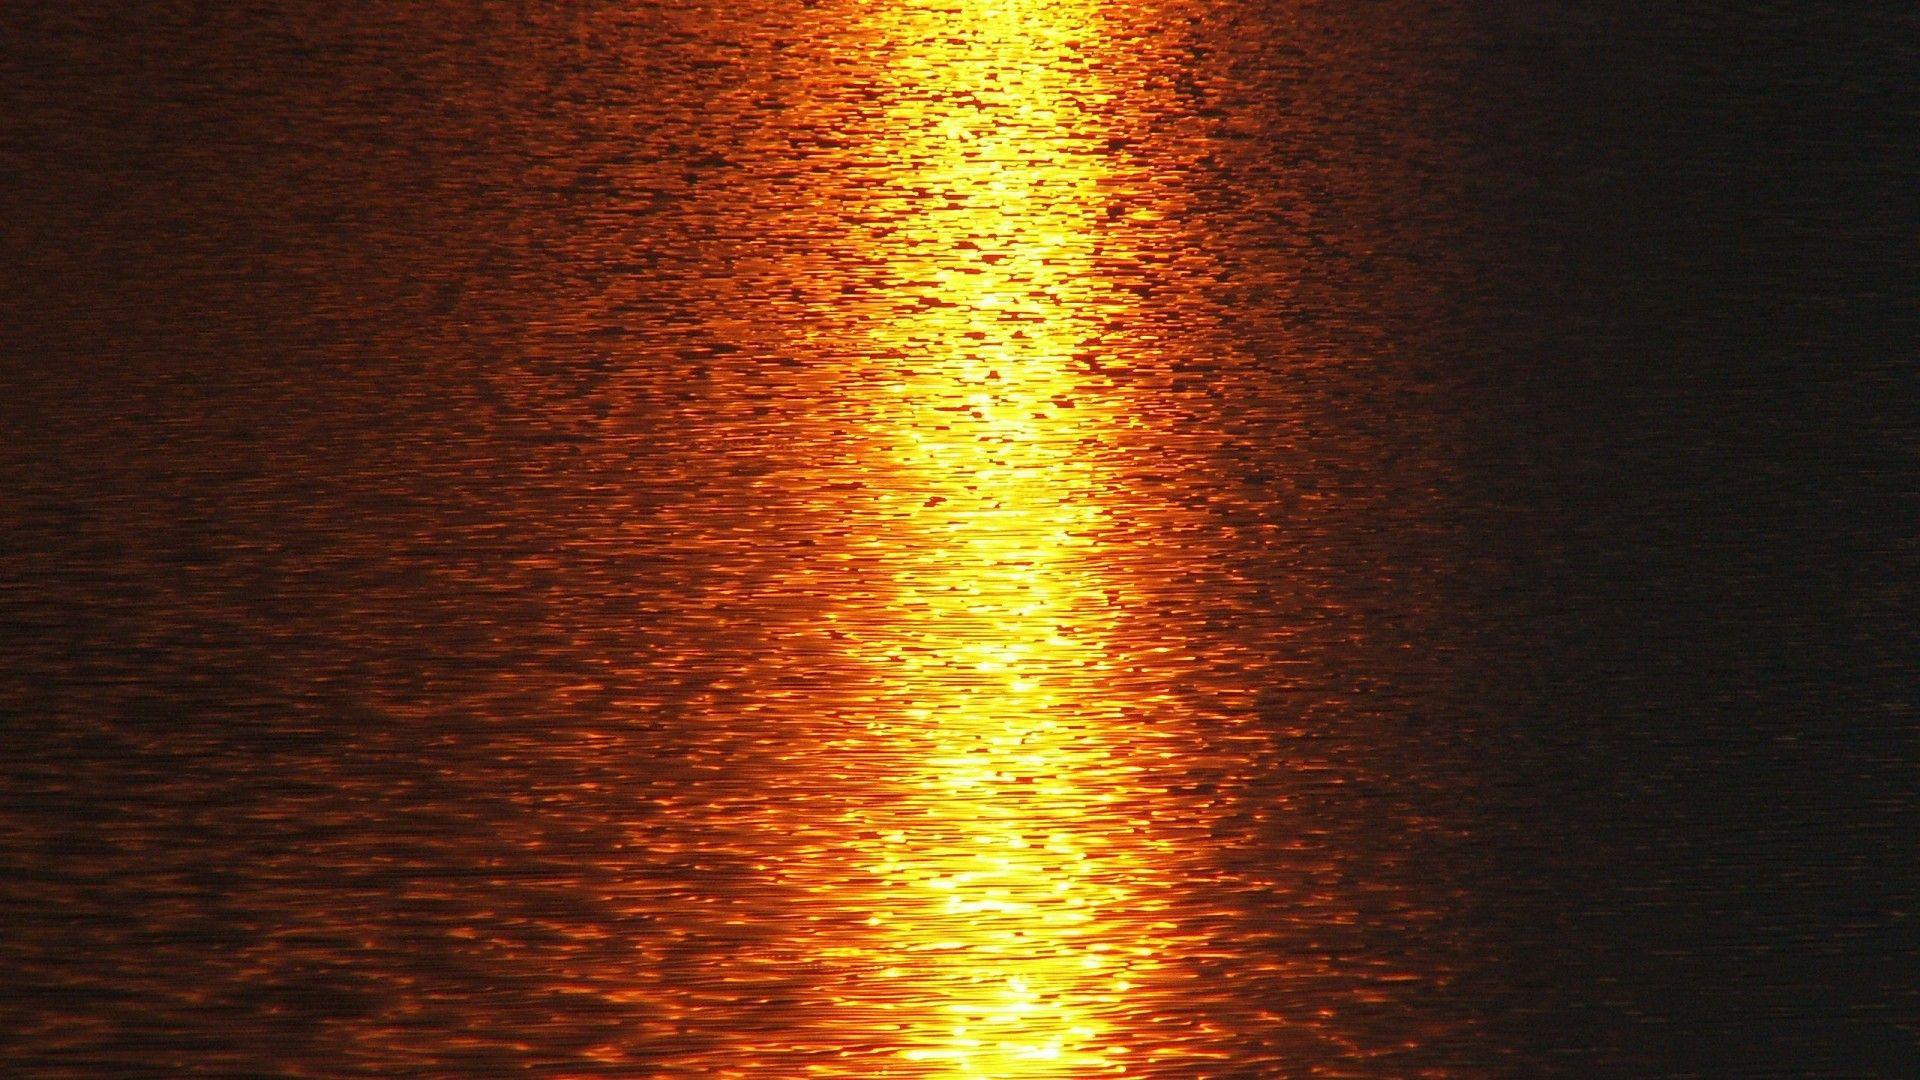 Sunsets: Water Maroon Shadow Reflex Path Awsome Multicolored View